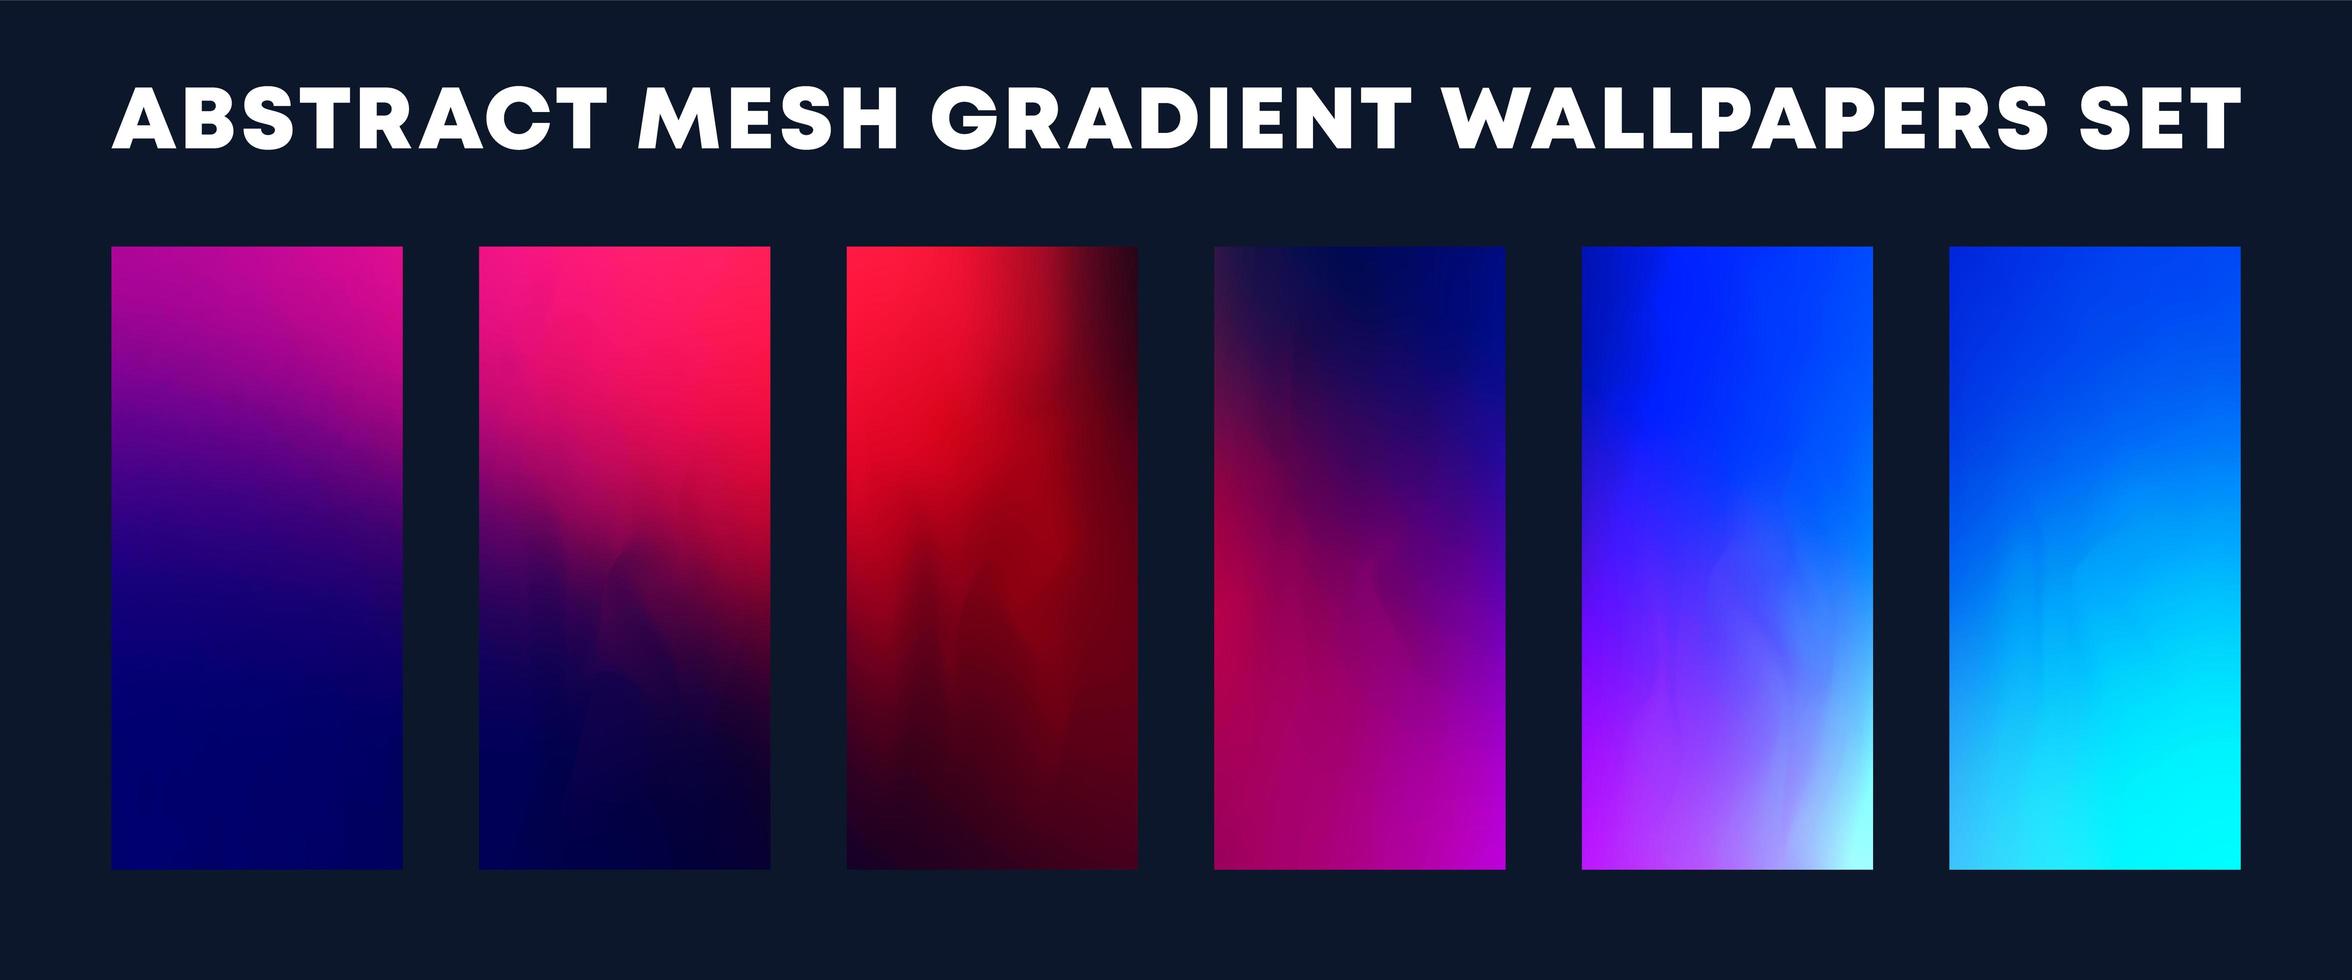 Set of colorful mesh gradient wallpapers vector